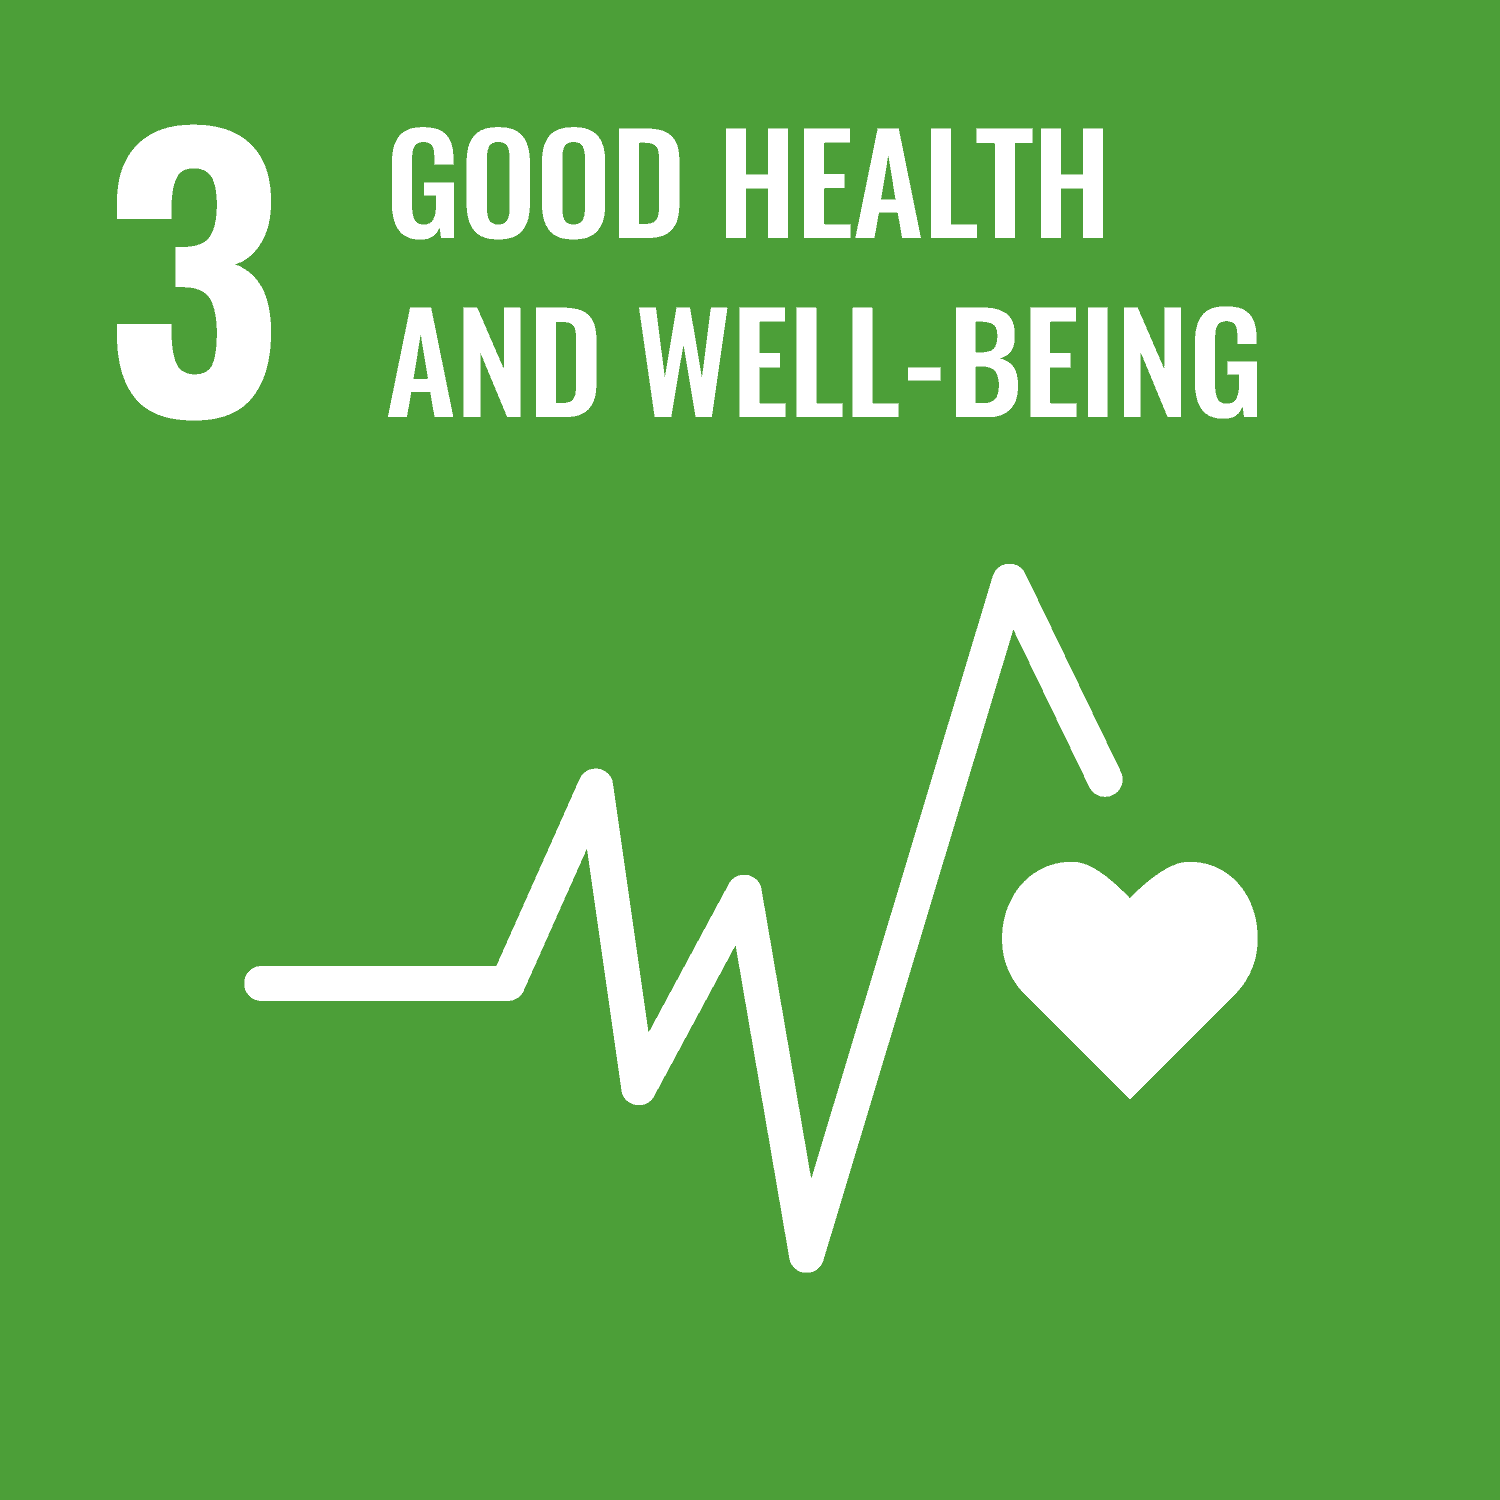 Good health and wellbeing